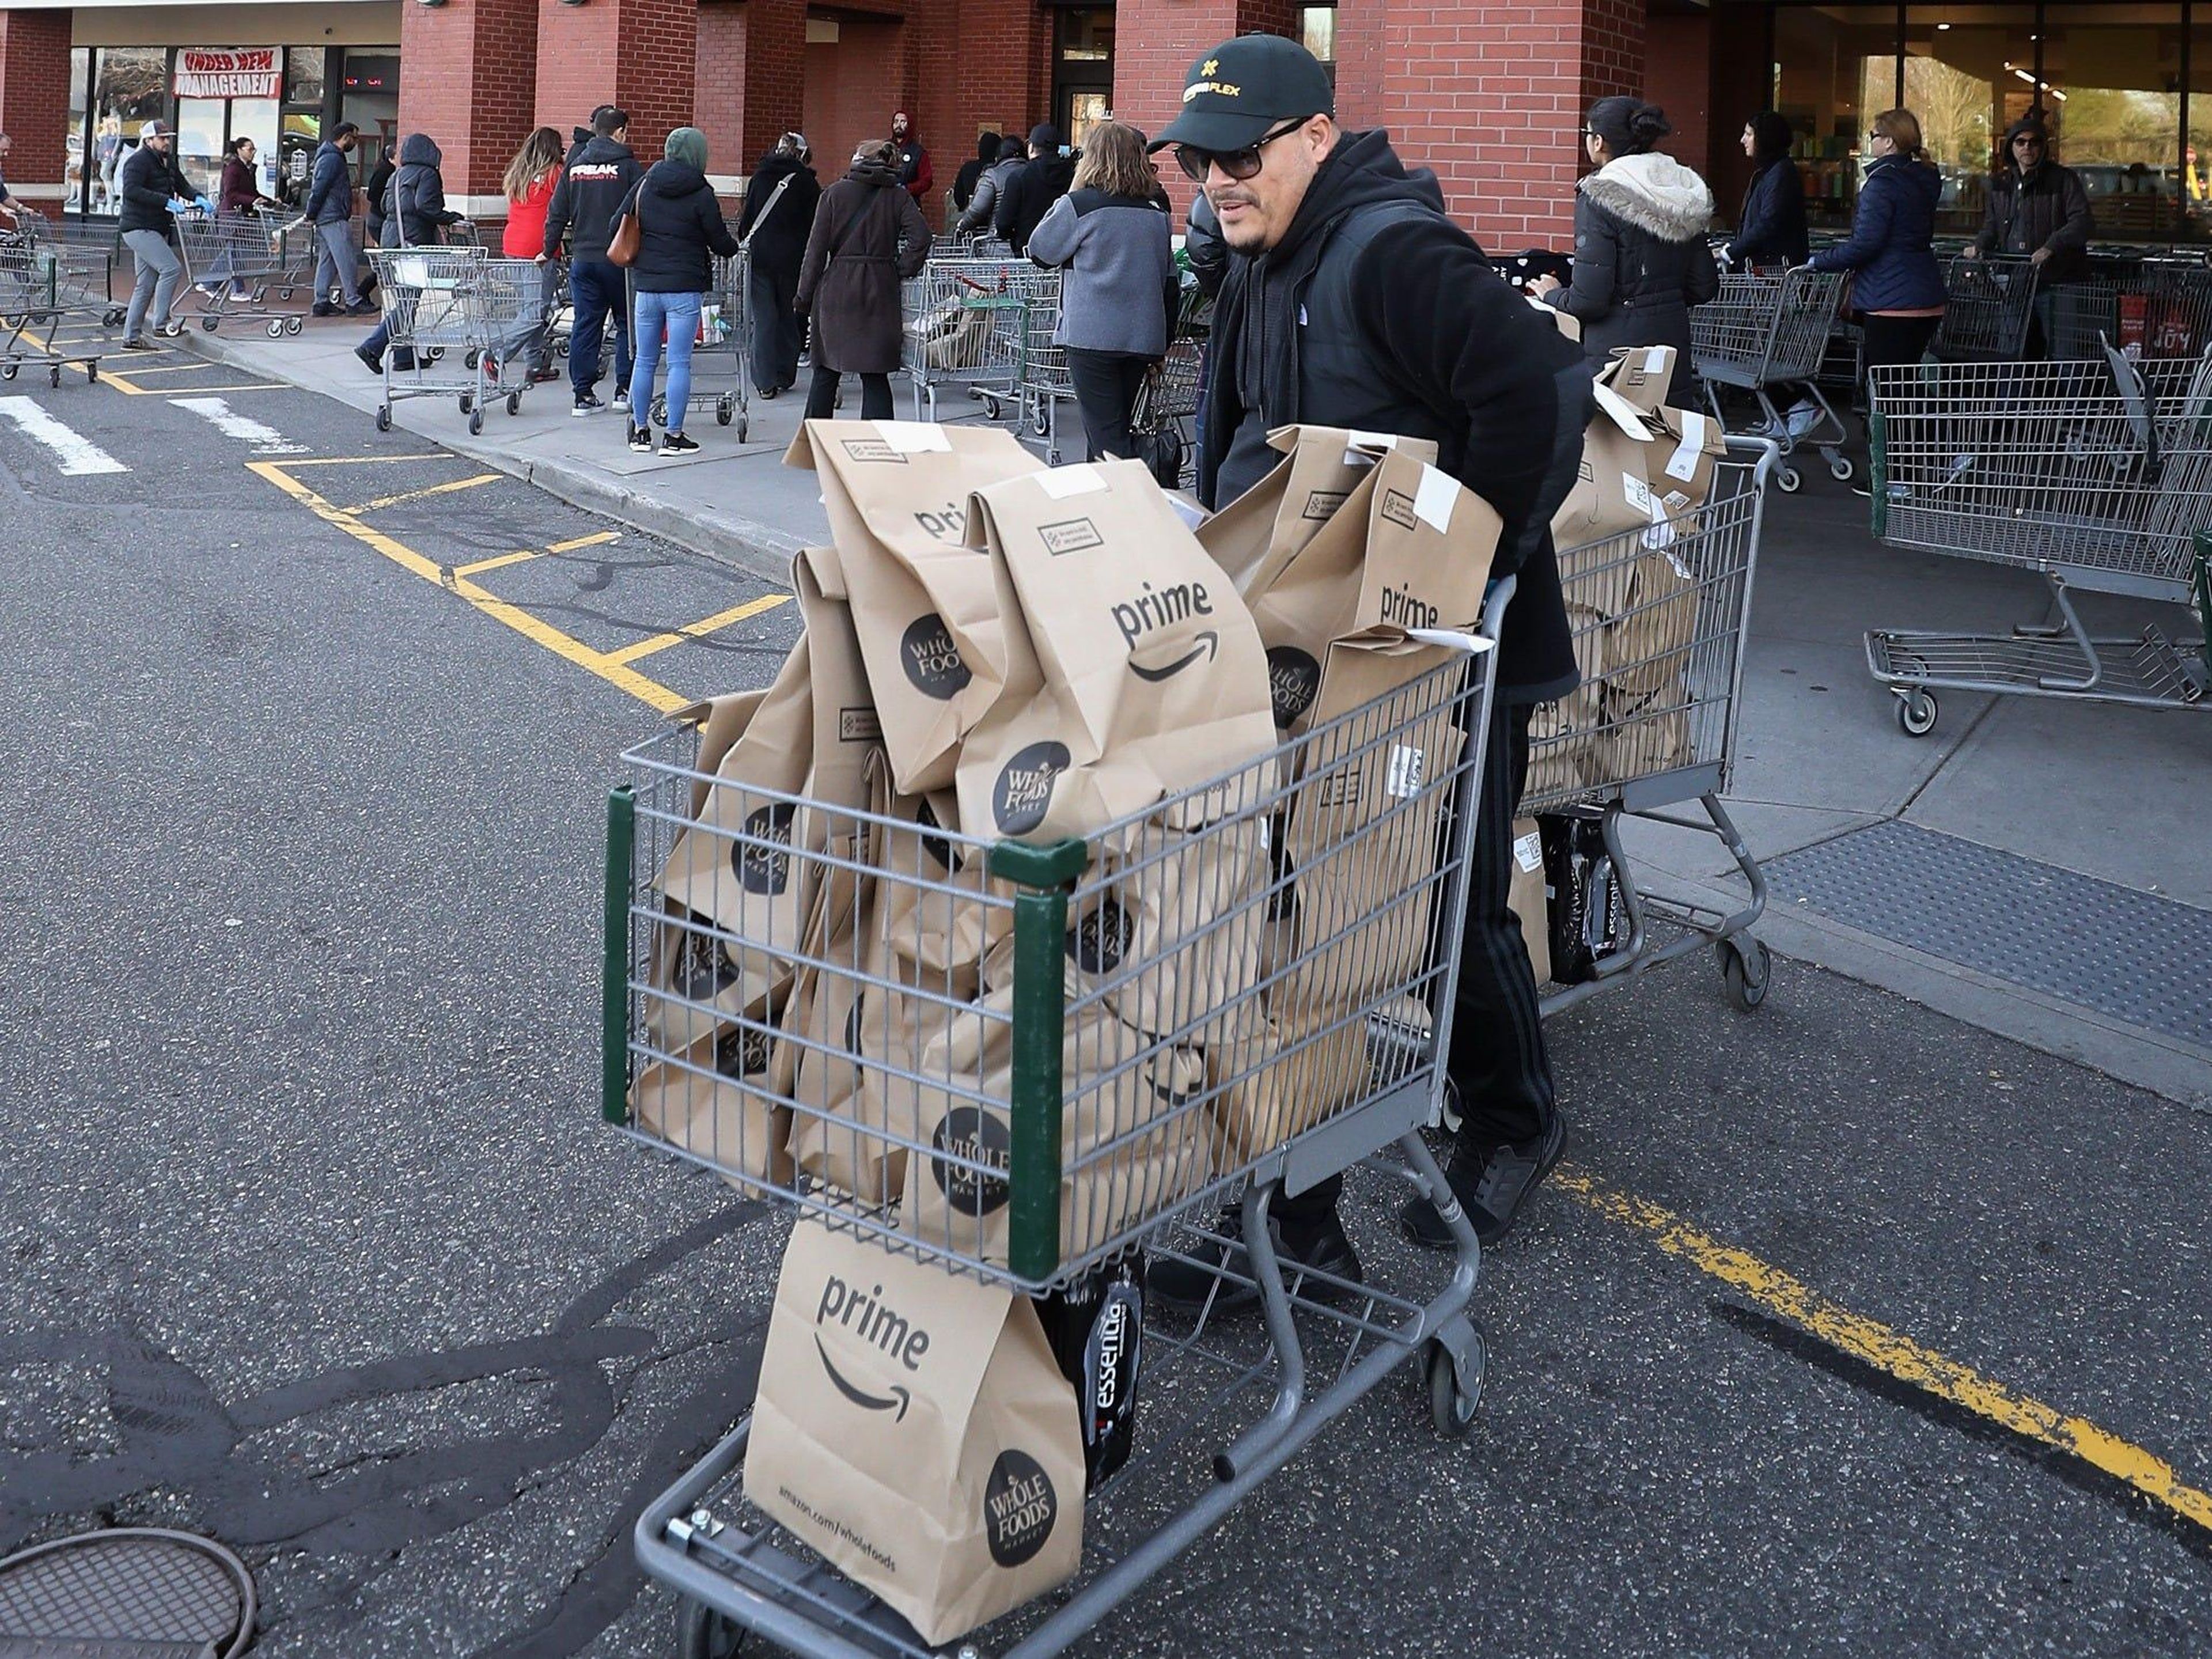 Amazon's online grocery sales tripled as people stayed home amid the coronavirus pandemic